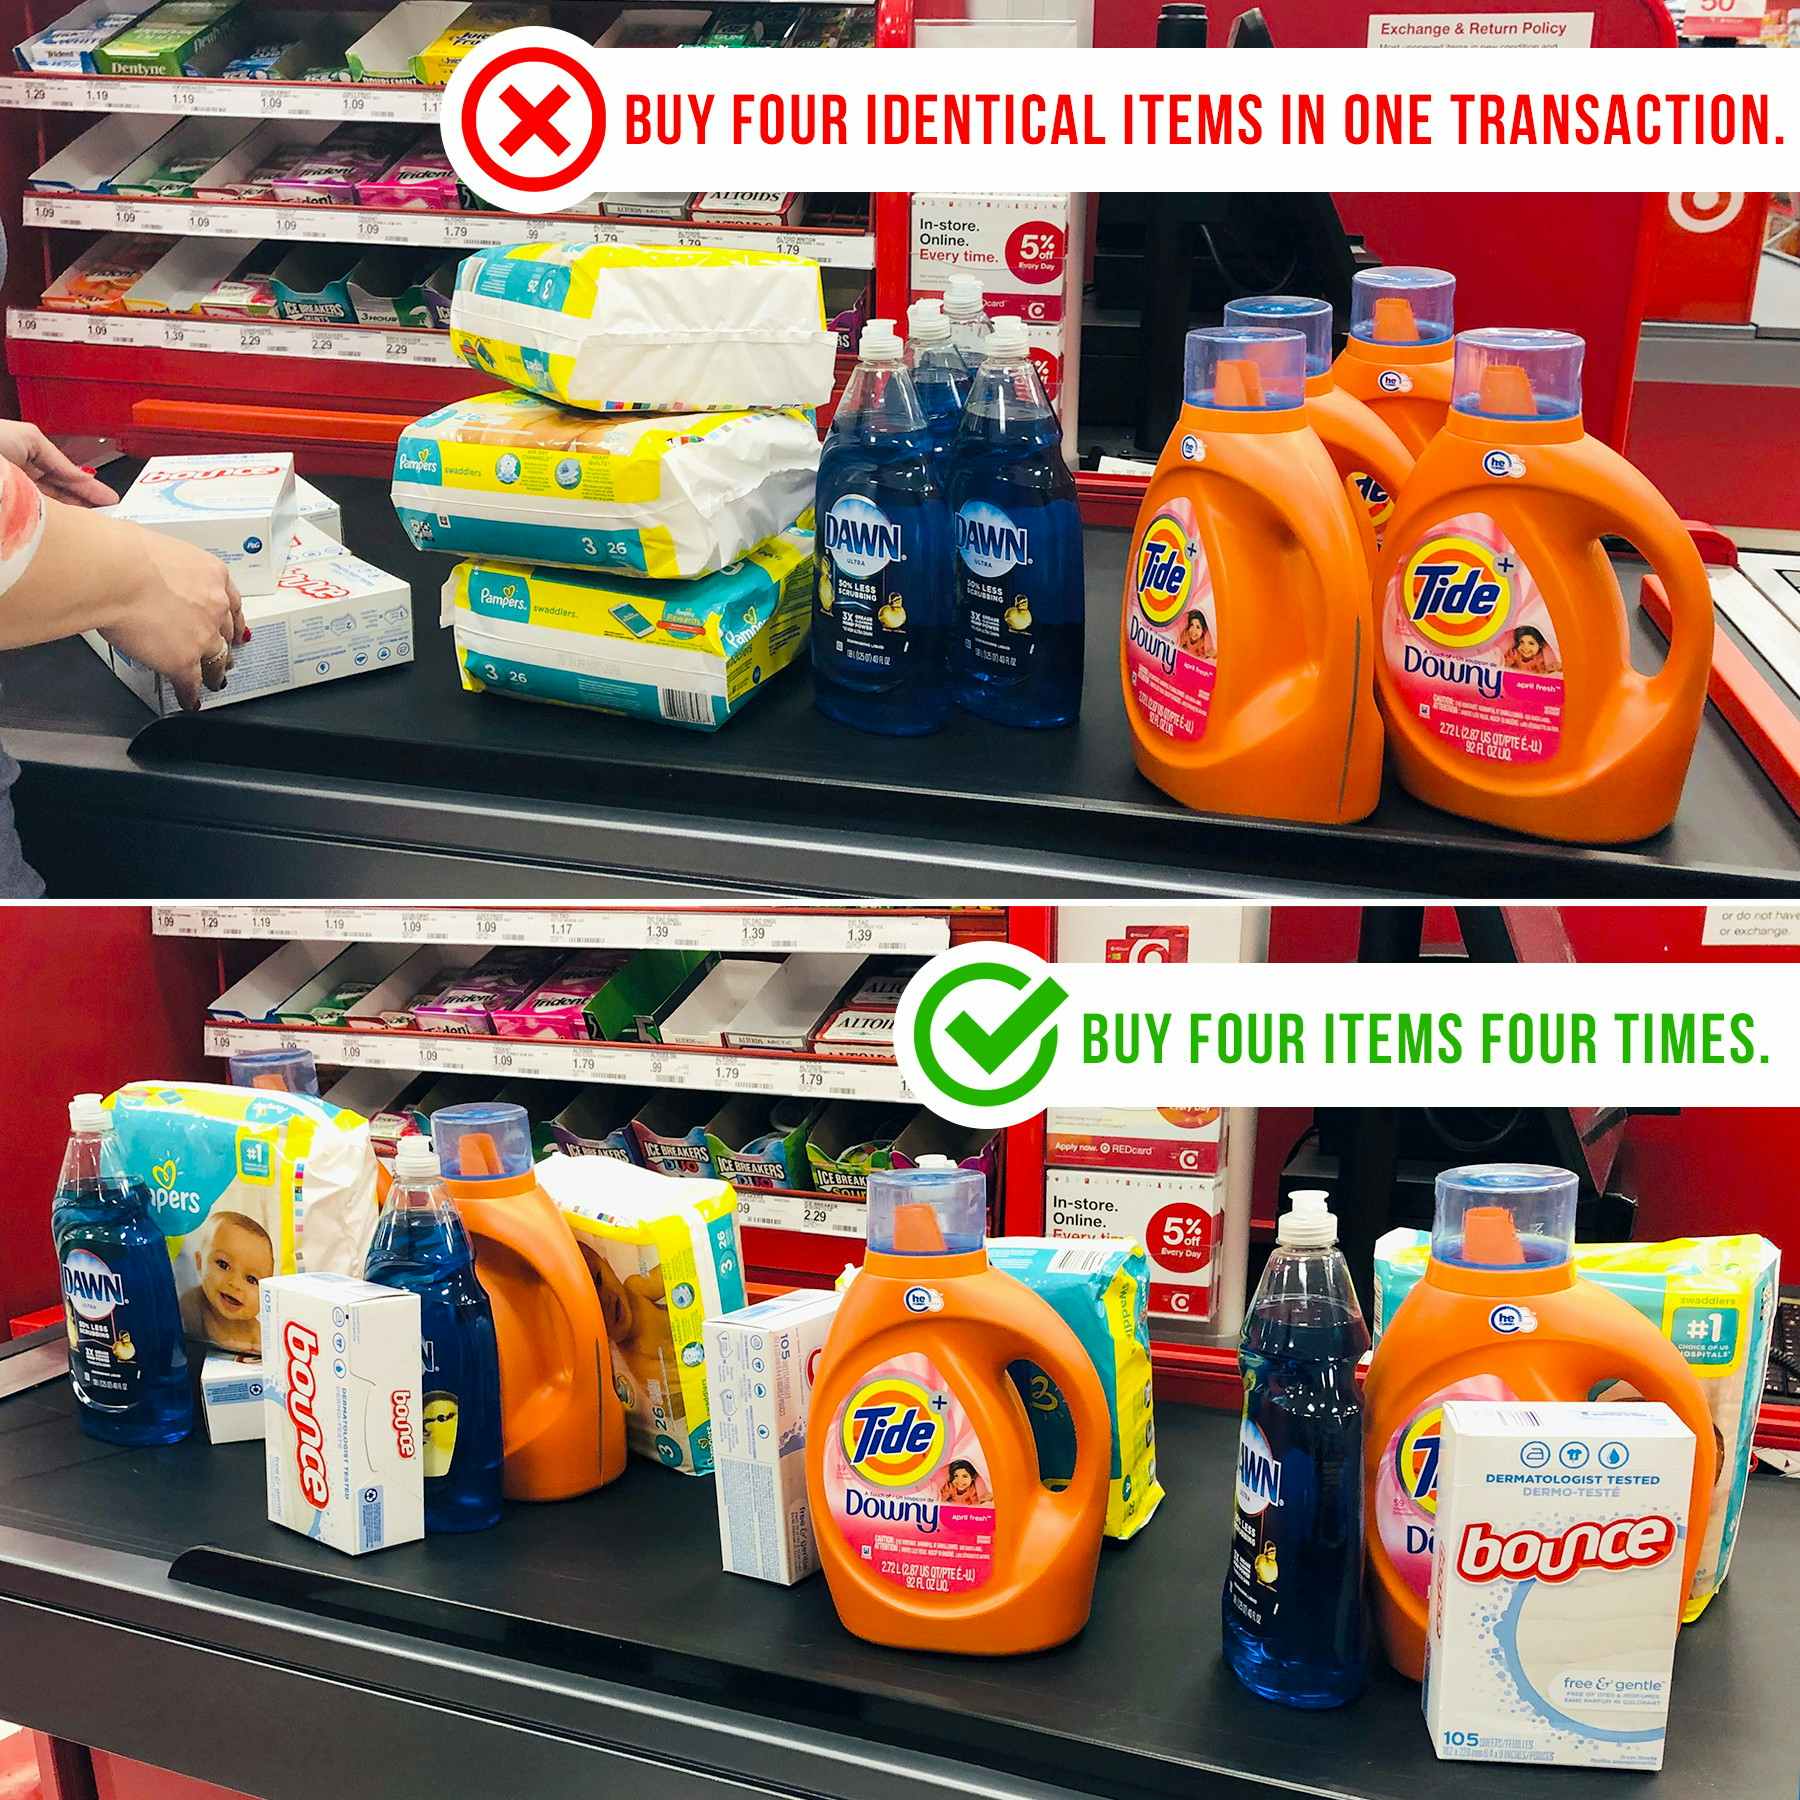 Instead of buying four identical items in one transaction, buy four different items four times.